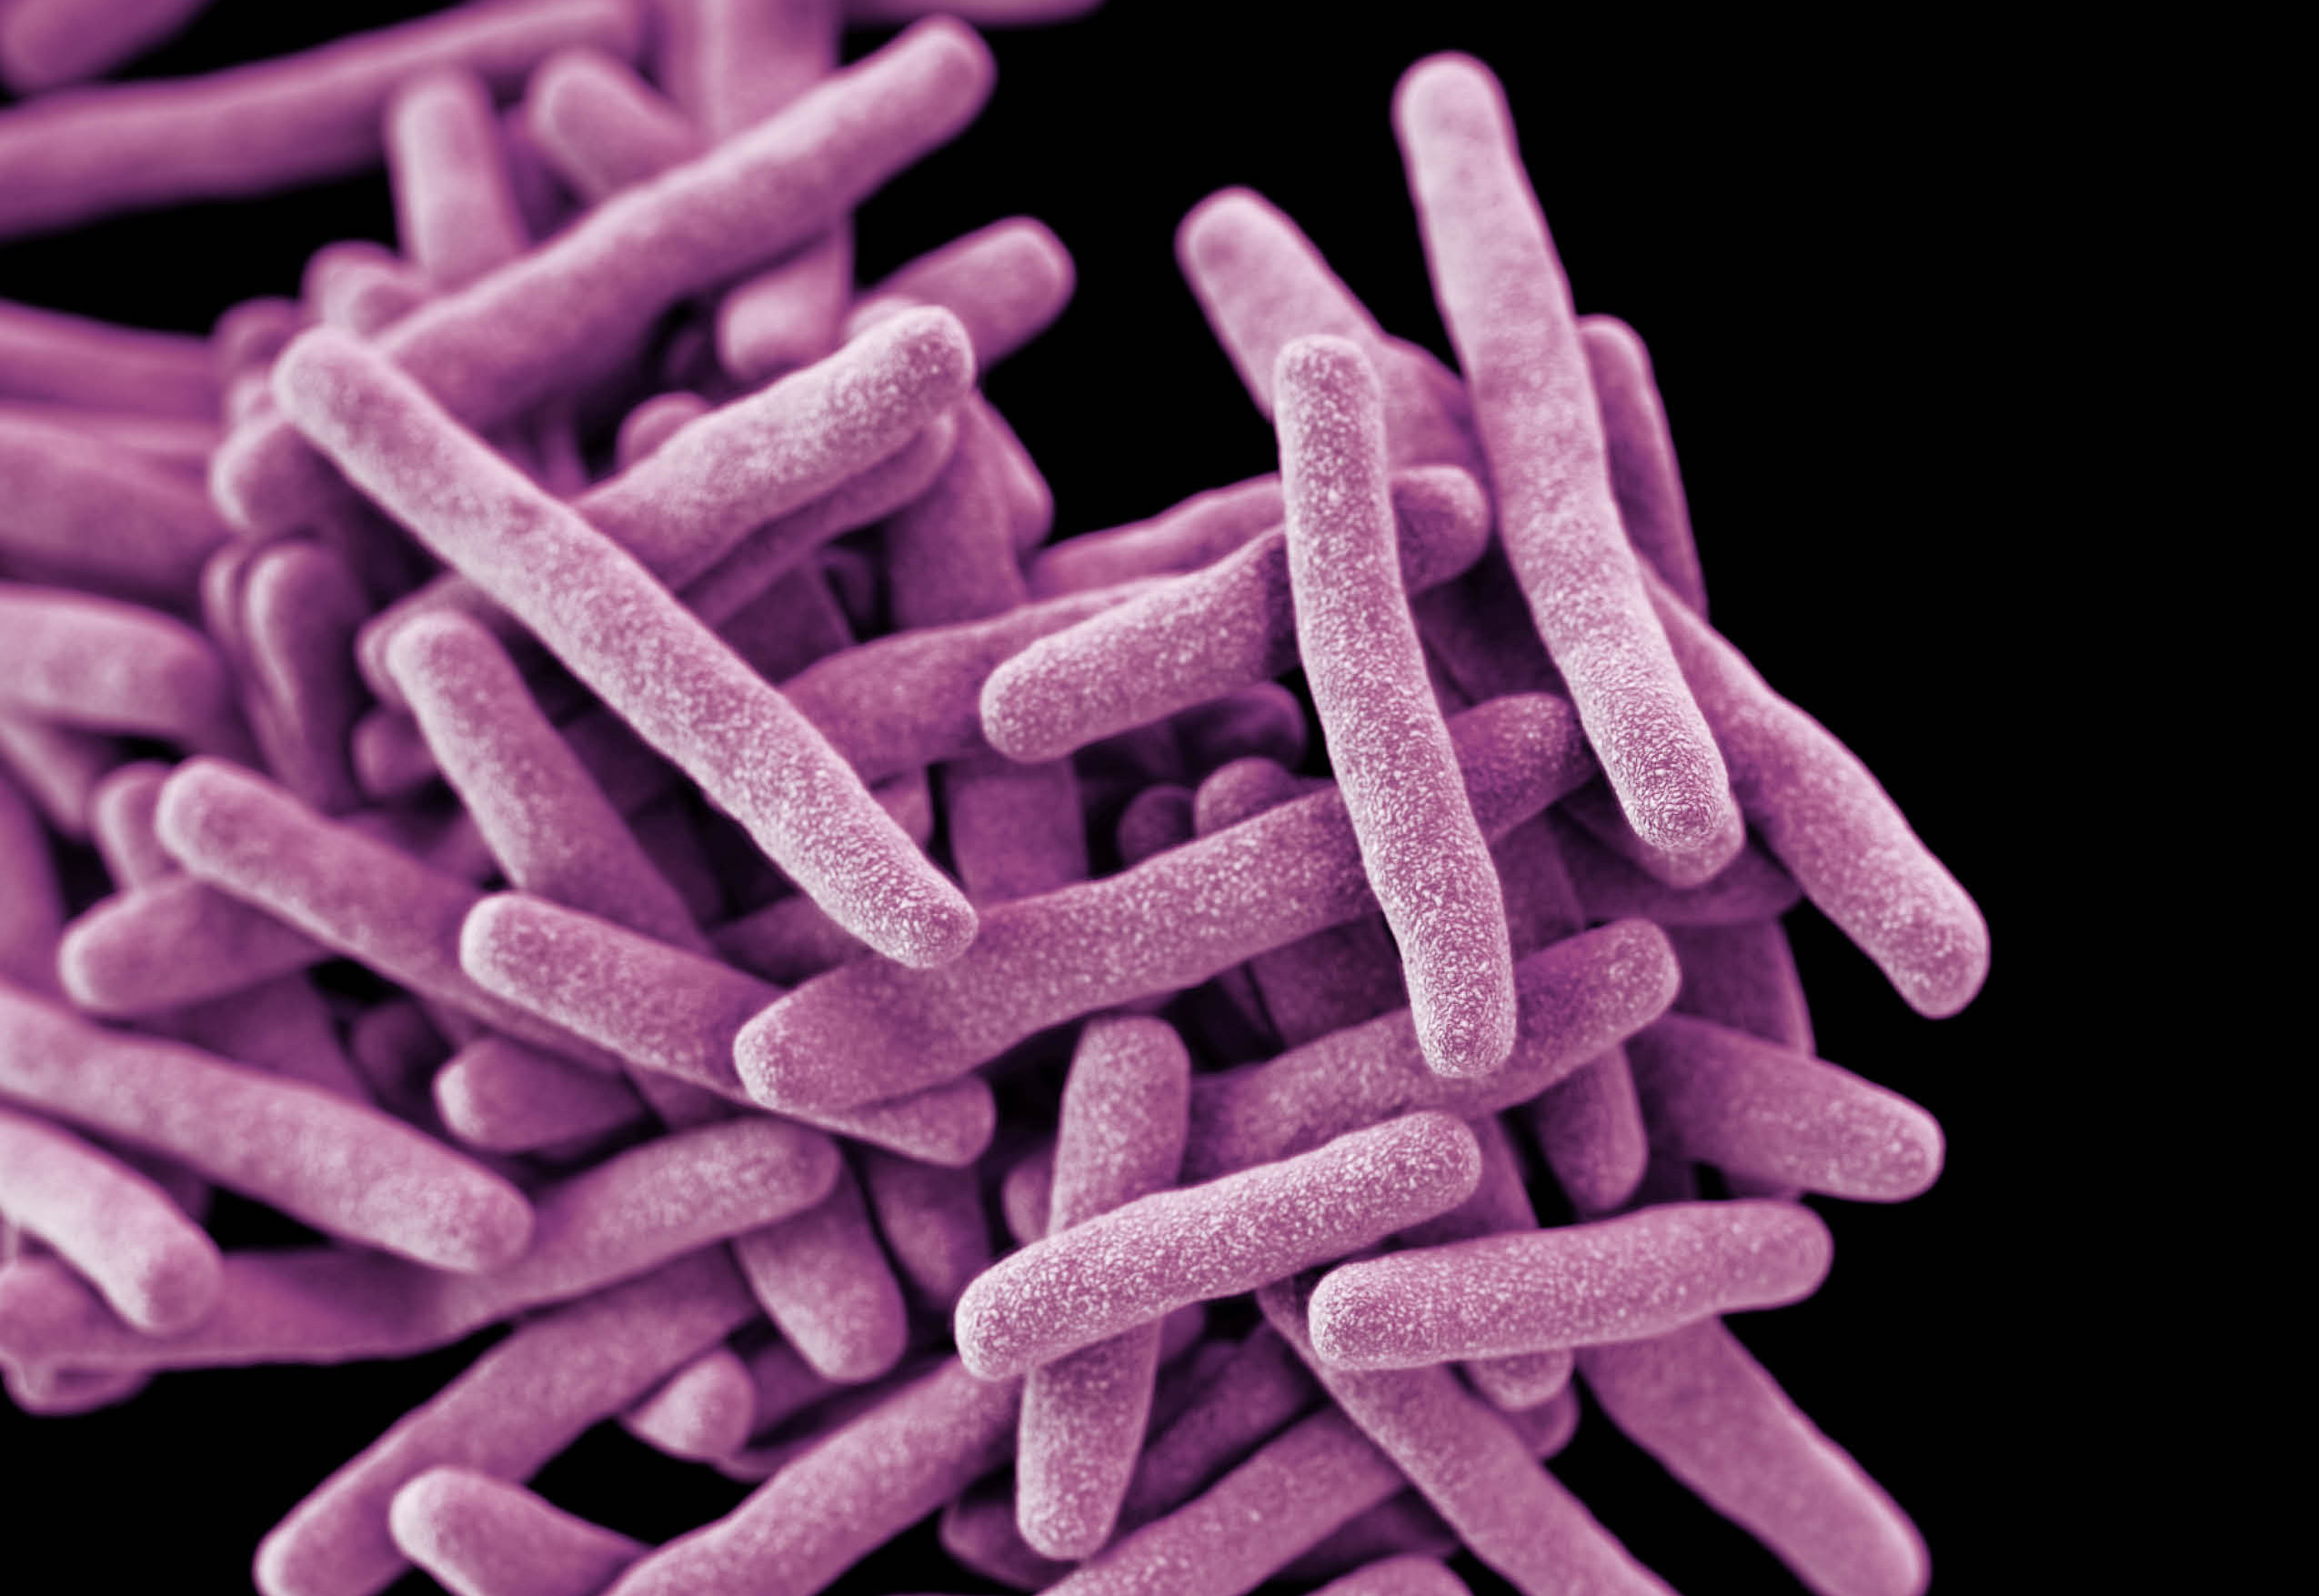 3D computer-generated image of a cluster of rod-shaped drug-resistant Mycobacterium tuberculosis bacteria Credit: CDC/James Archer